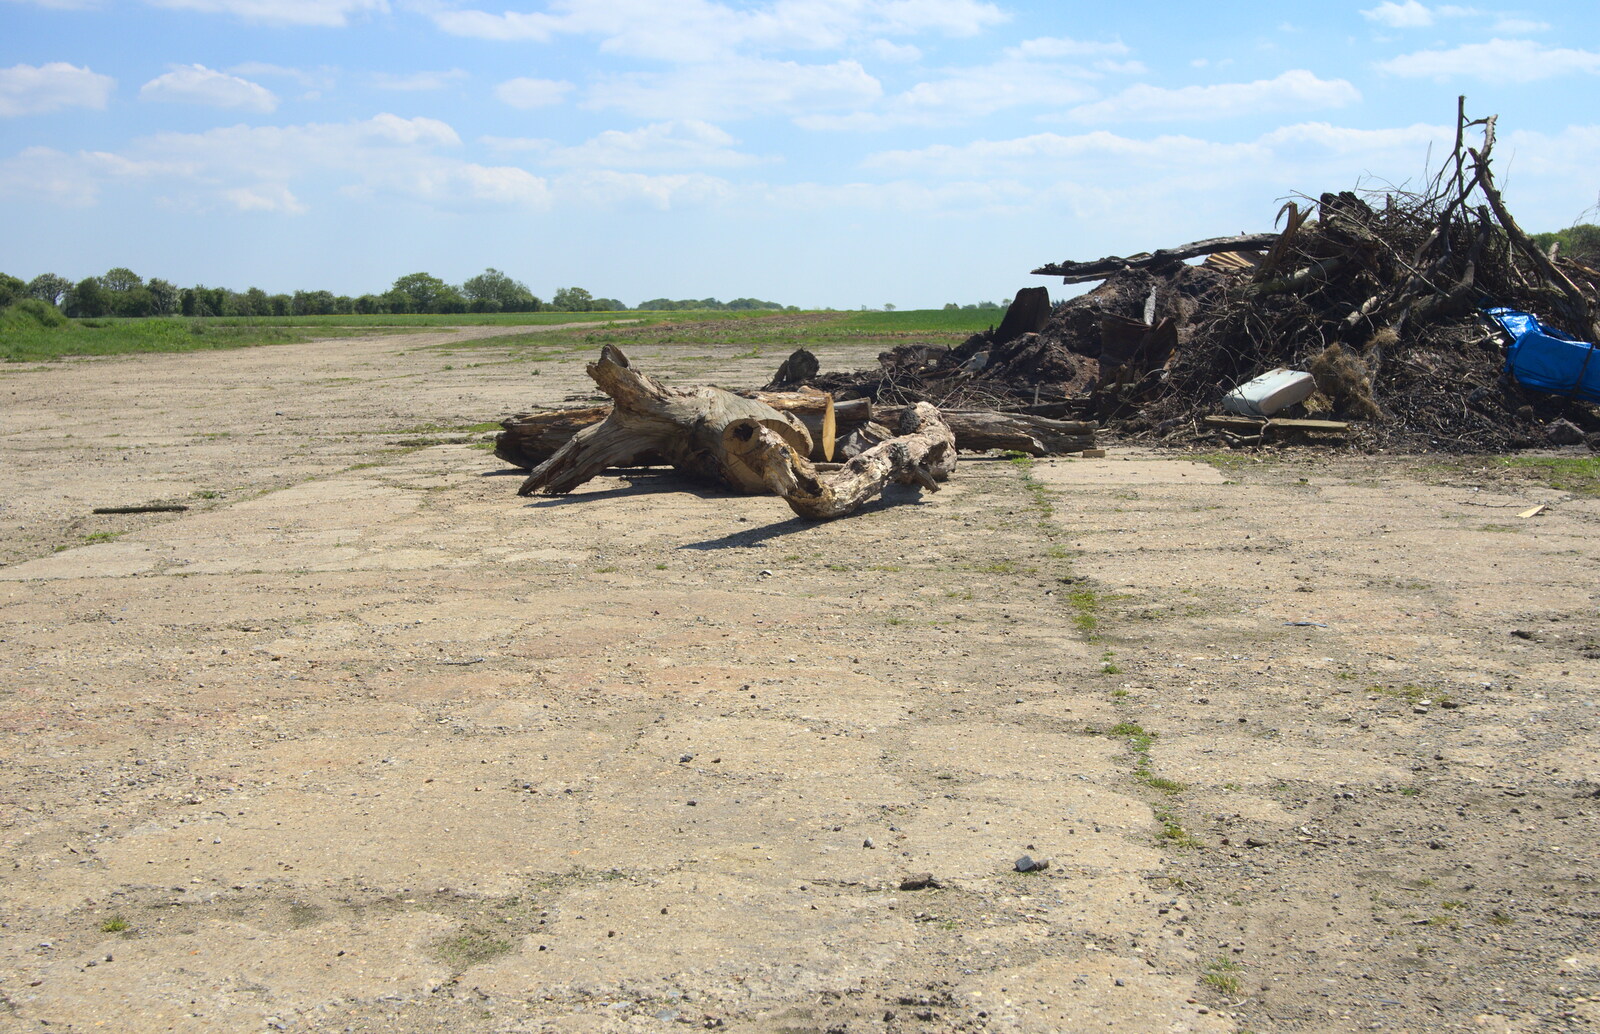 The only remaining bit of runway from A "Sally B" B-17 Flypast, Thorpe Abbots, Norfolk - 27th May 2013